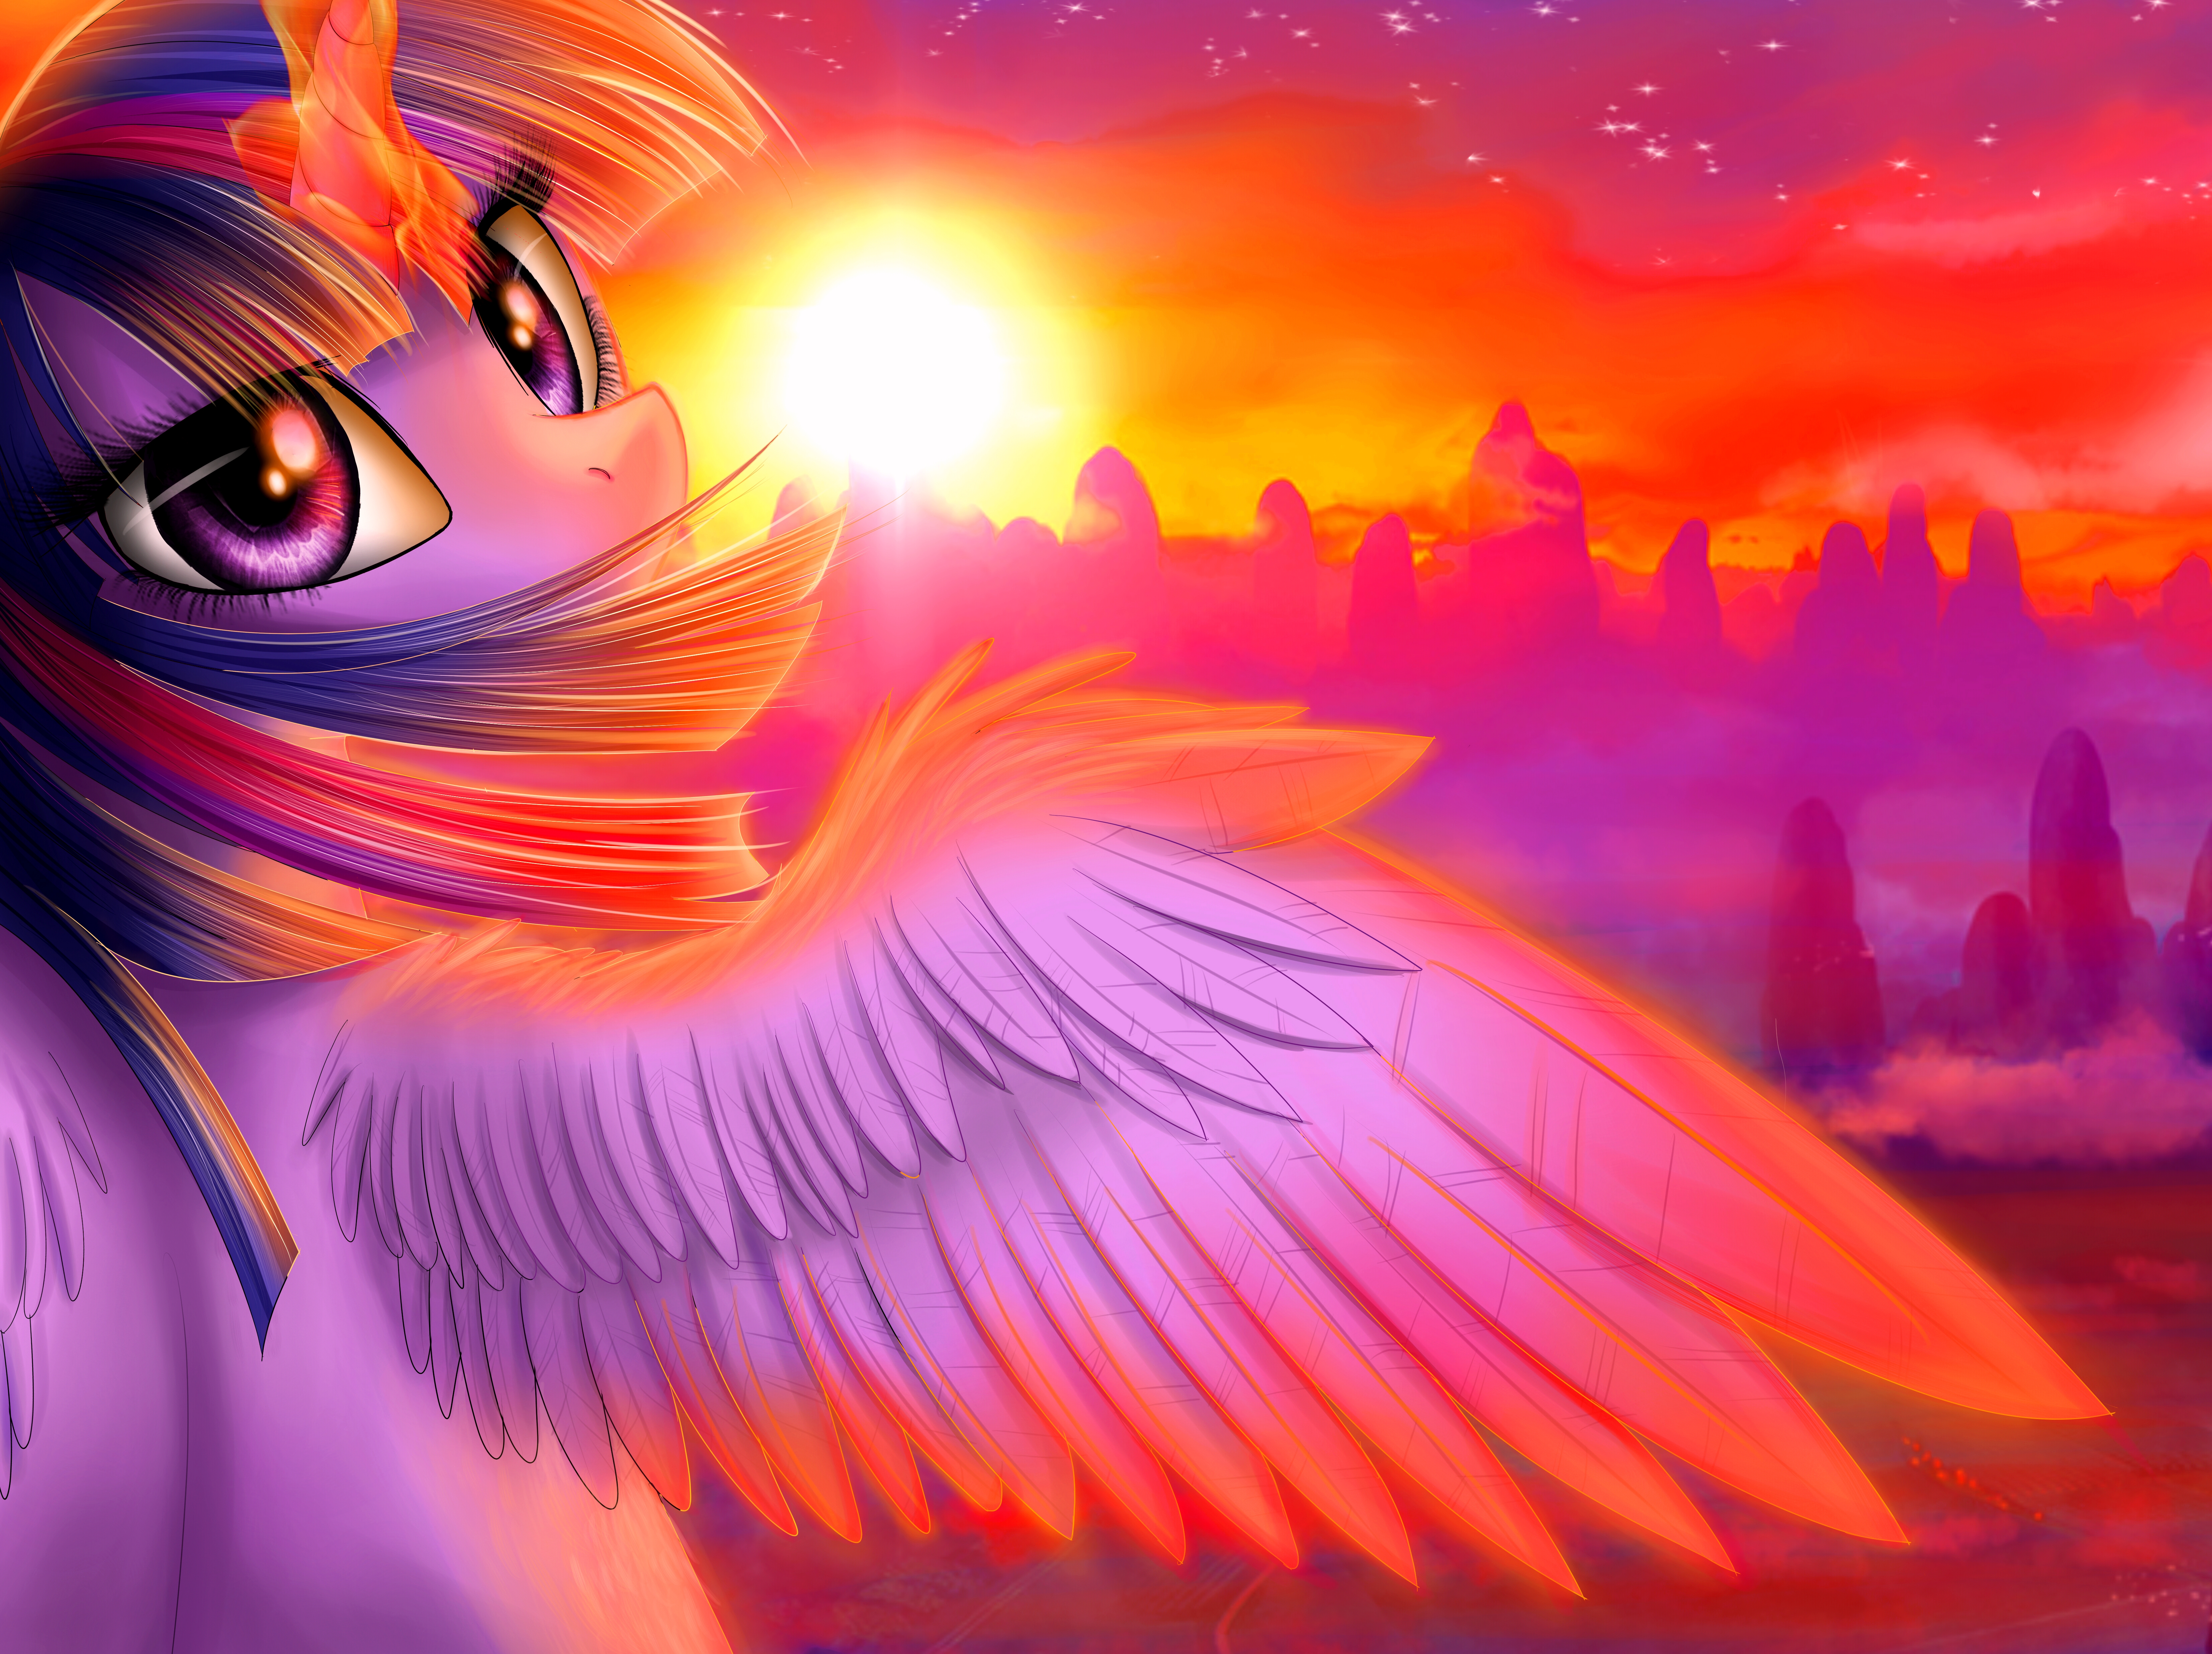 she_loves_the_sunset_by_lyra_senpai-d8p2